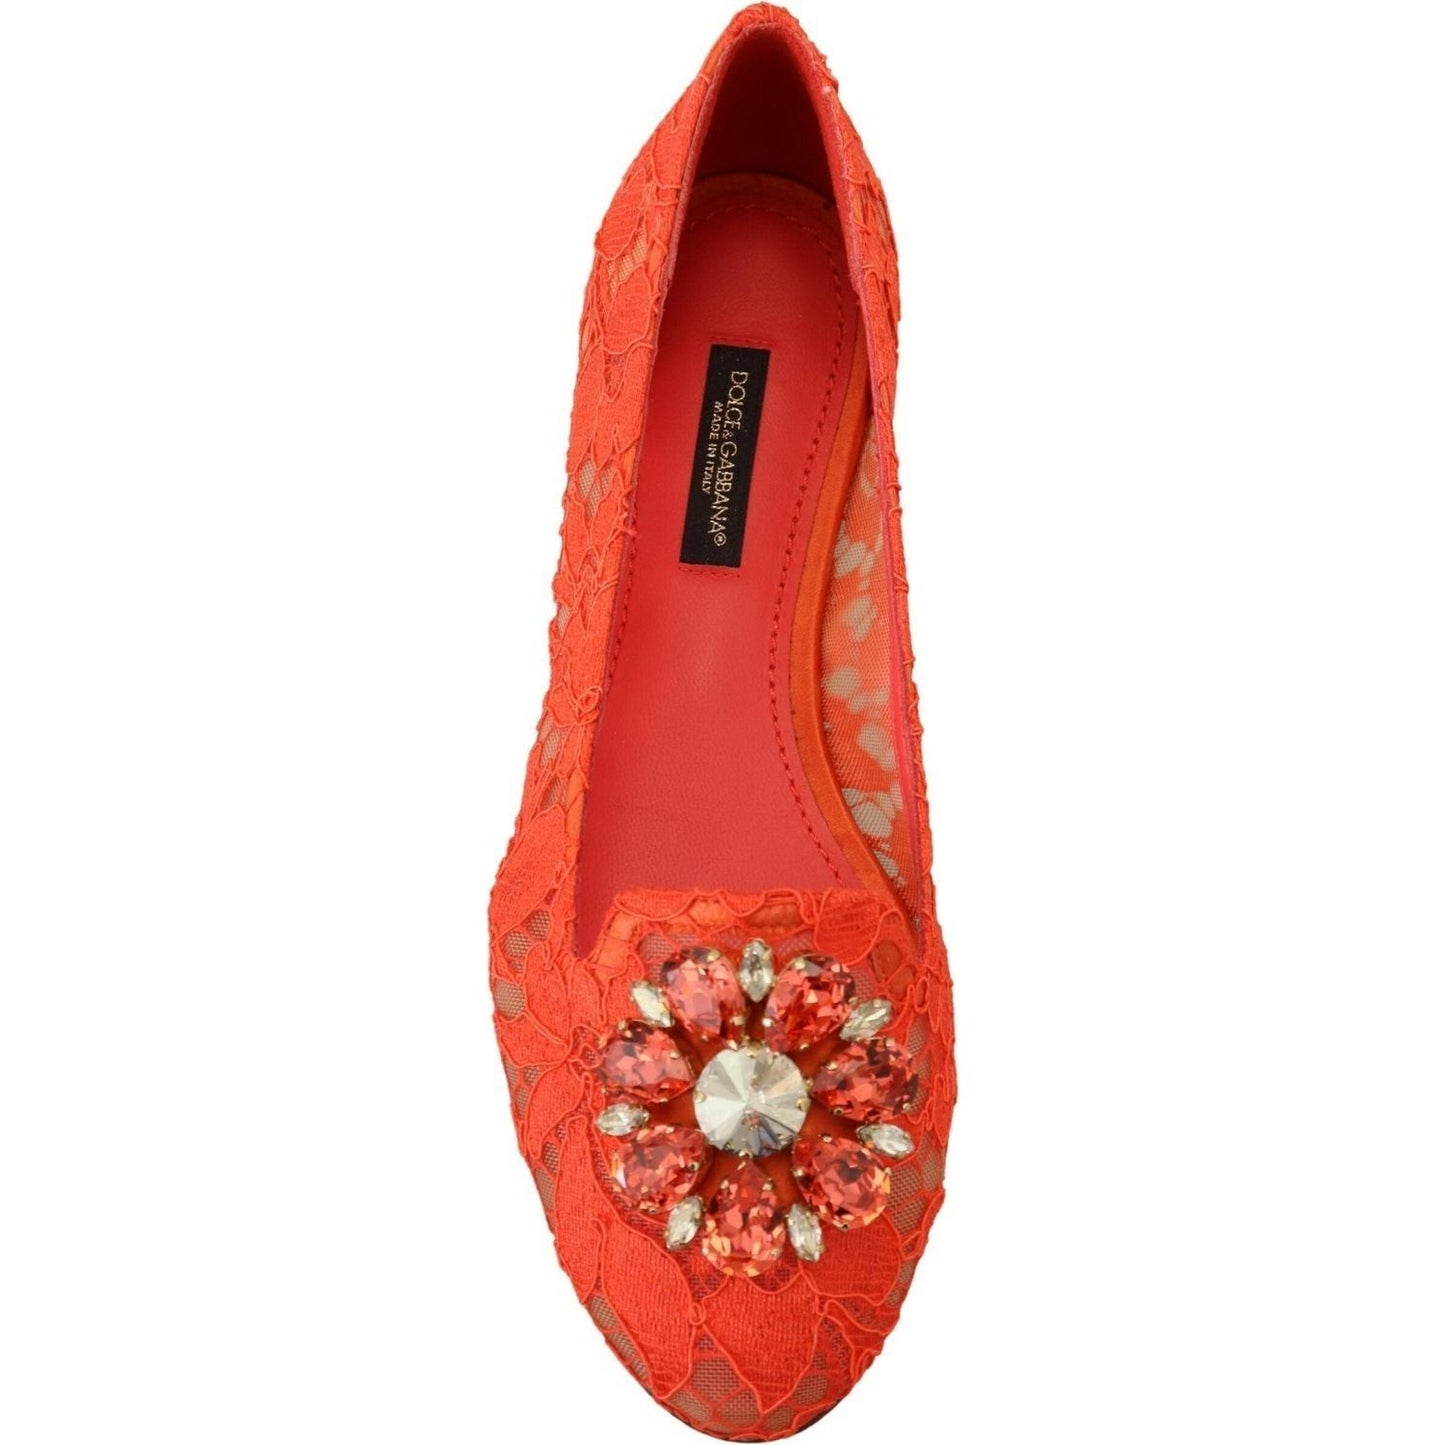 Dolce & Gabbana Elegant Lace Vally Flats in Coral Red red-taormina-lace-crystals-ballet-flats-shoes IMG_4973-scaled-b0db26c9-1f7.jpg